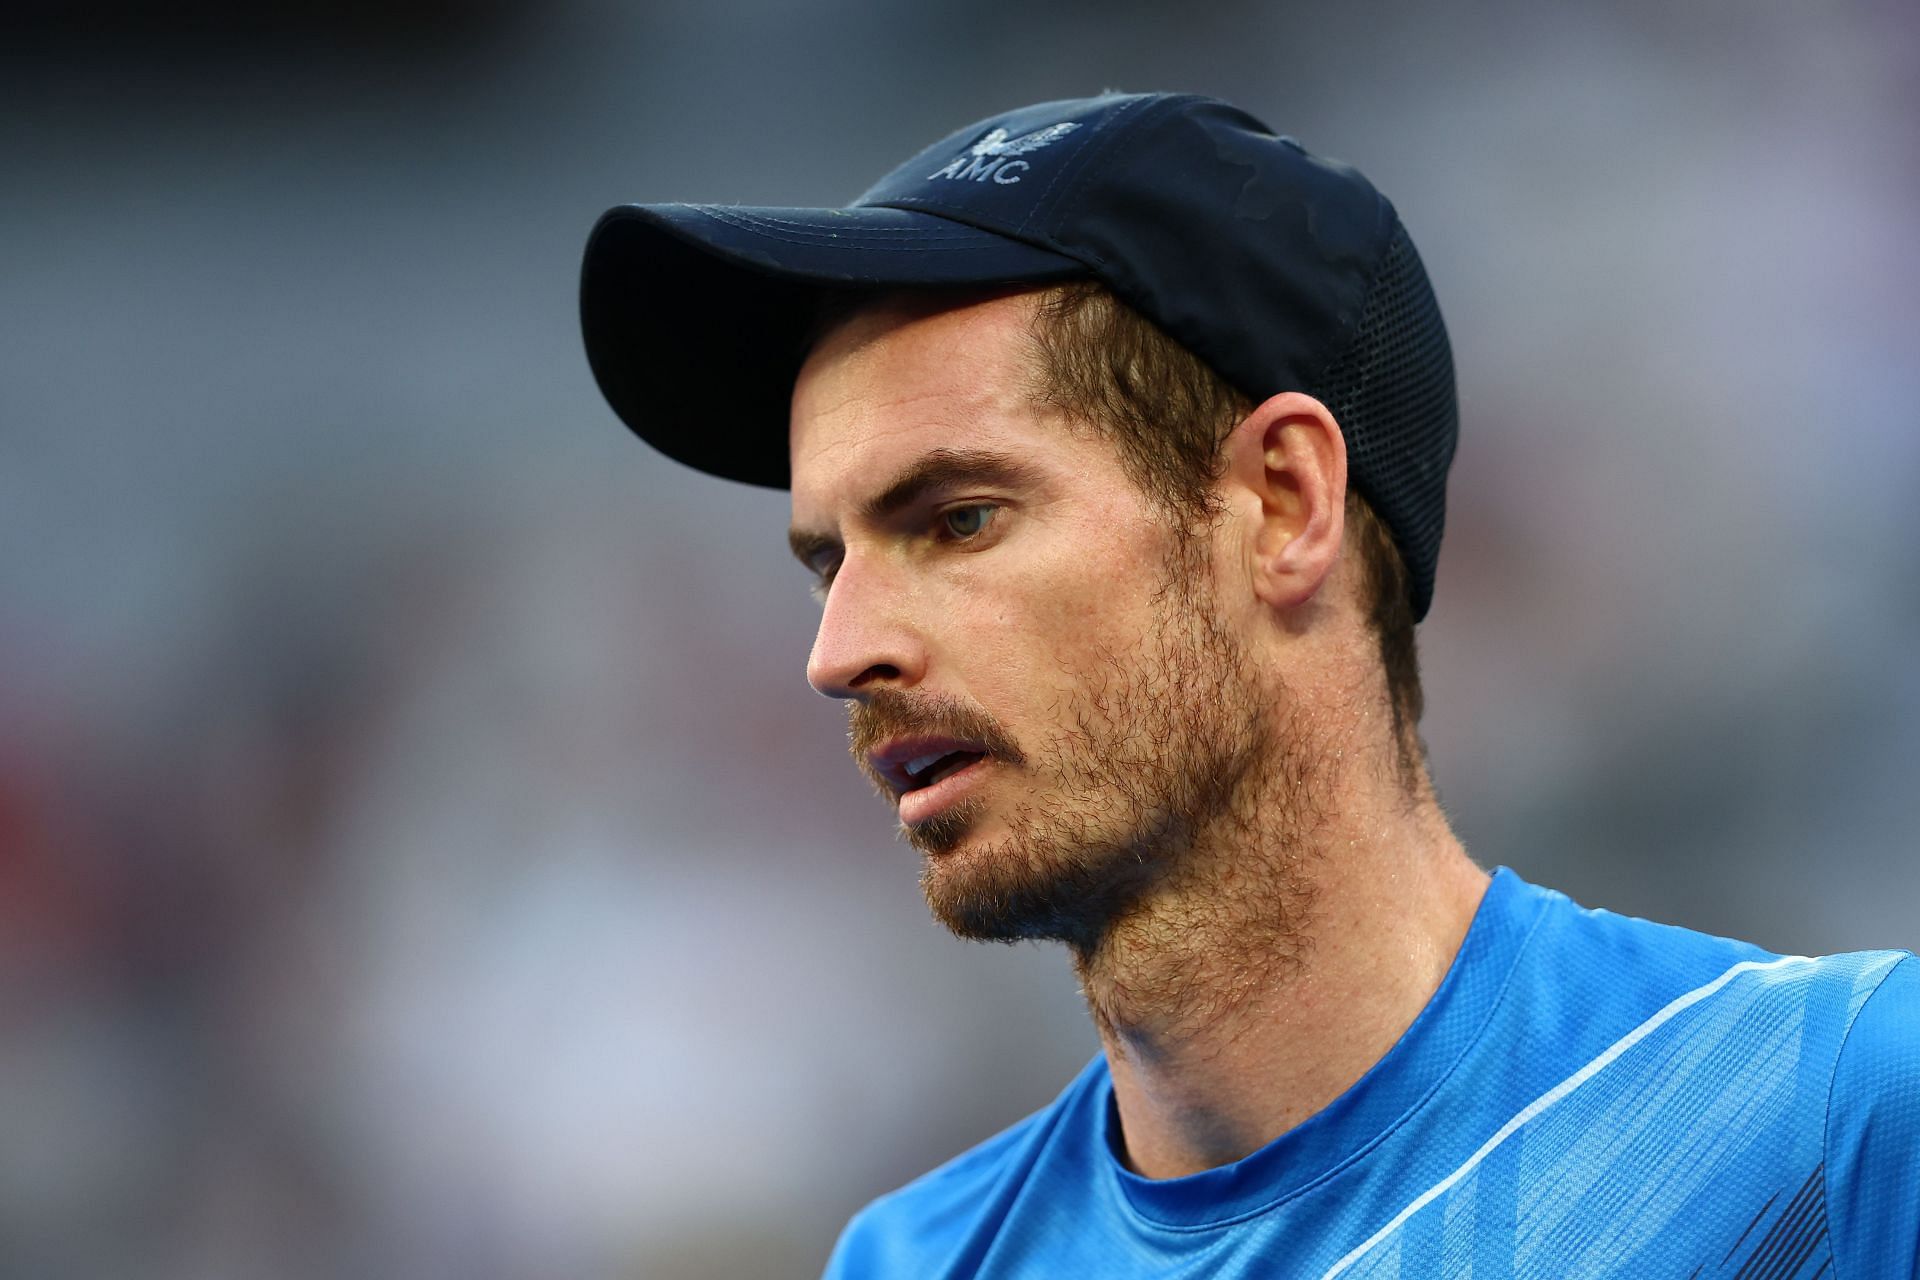 Andy Murray during his match with Taro Daniel in the second round of the 2022 Australian Open